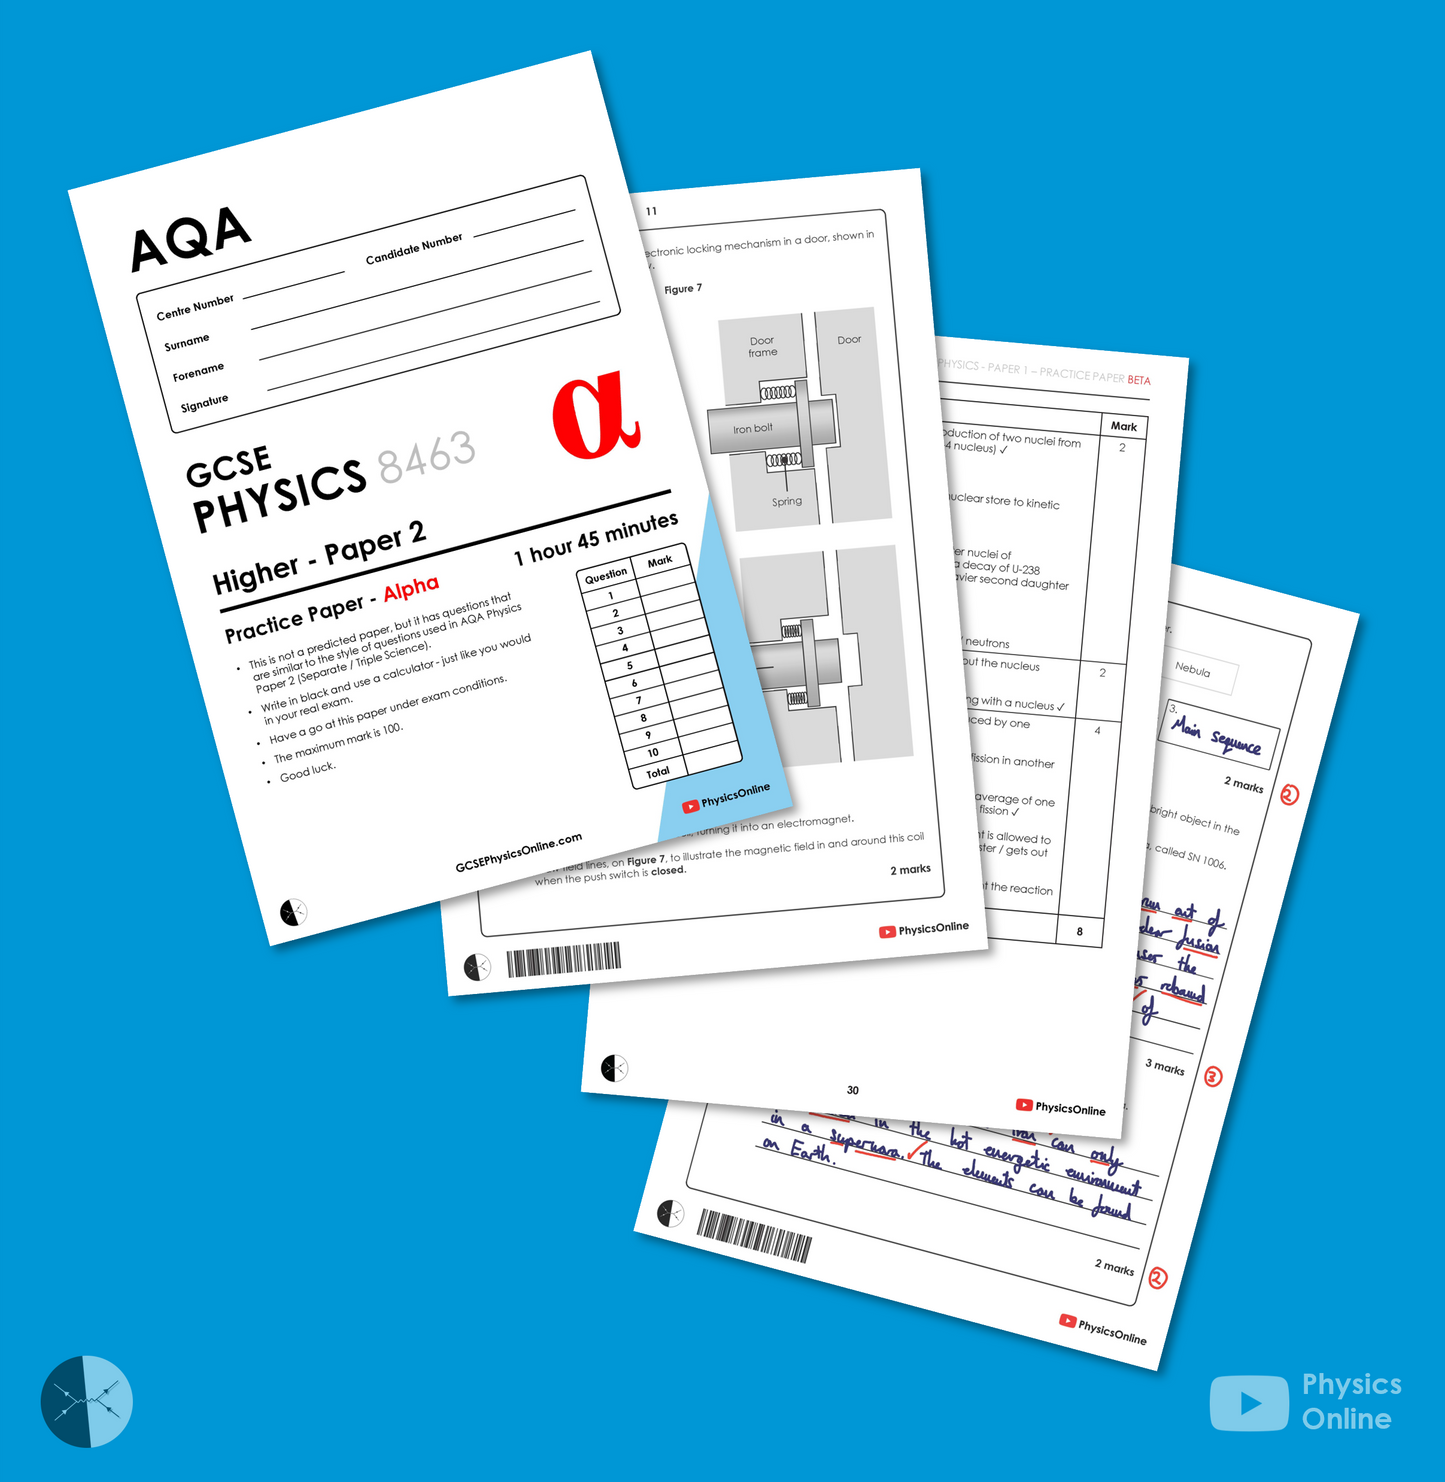 AQA Practice Papers | Paper 2 - Multipack | Teacher Issue | GCSE Physics